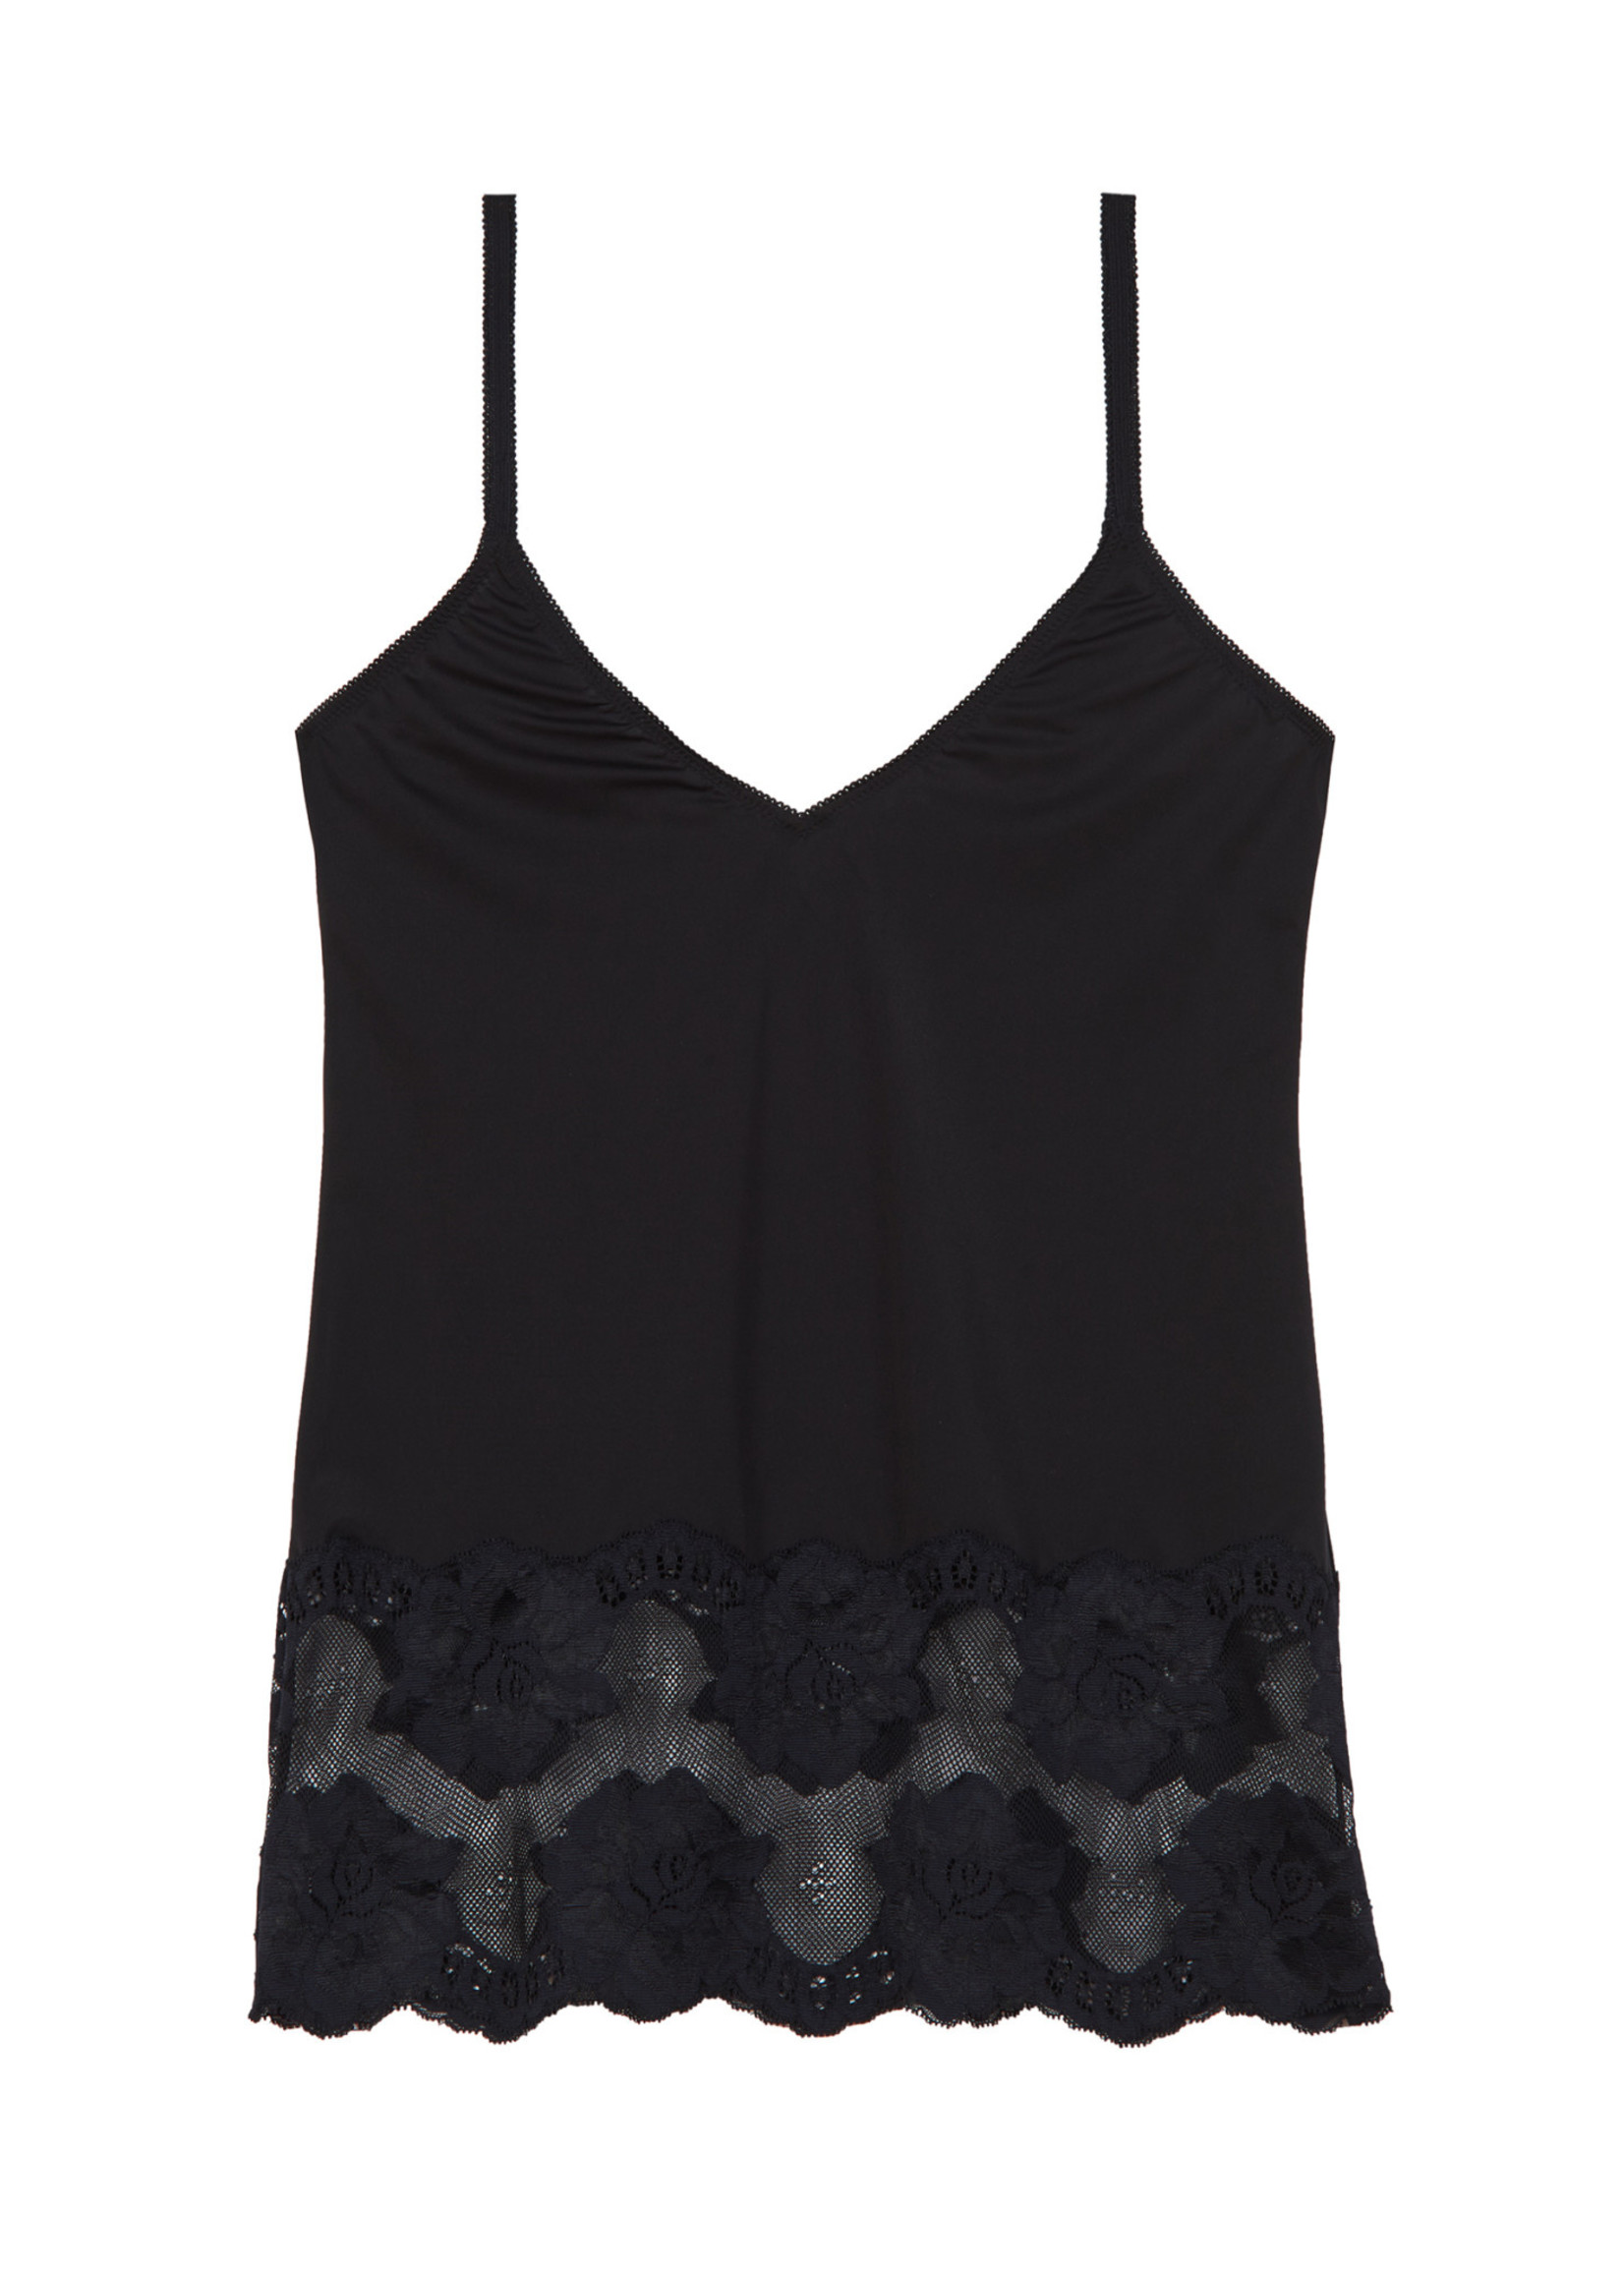 Wacoal Light and Lacy Cami - Black